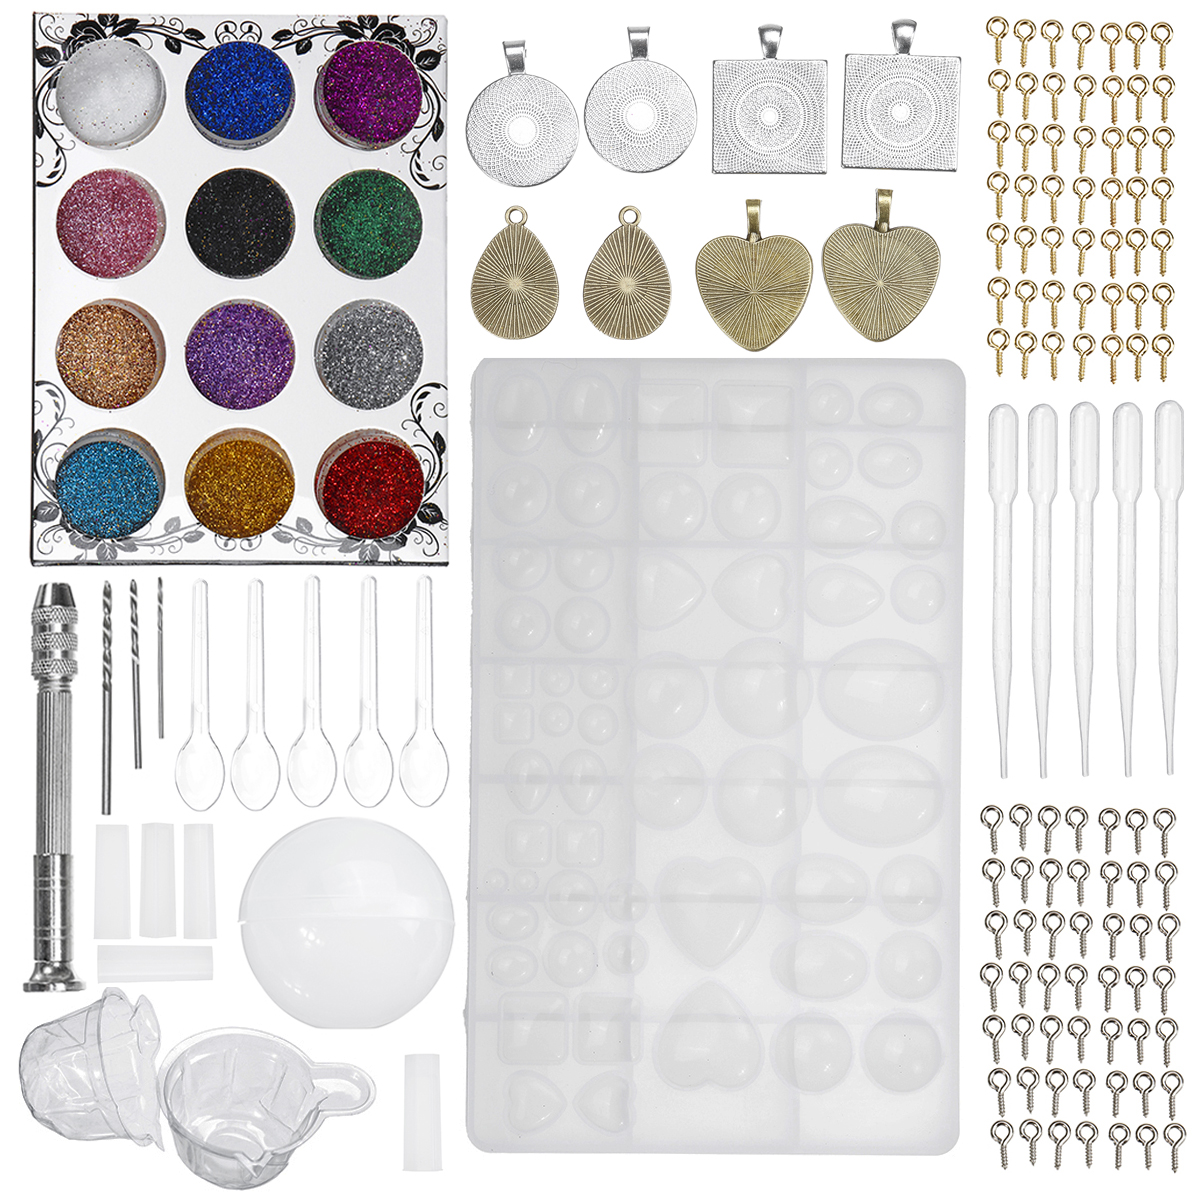 

118/138 Pcs Resin Casting Mold Tool Kits Silicone Making Jewelry Pendant Mould